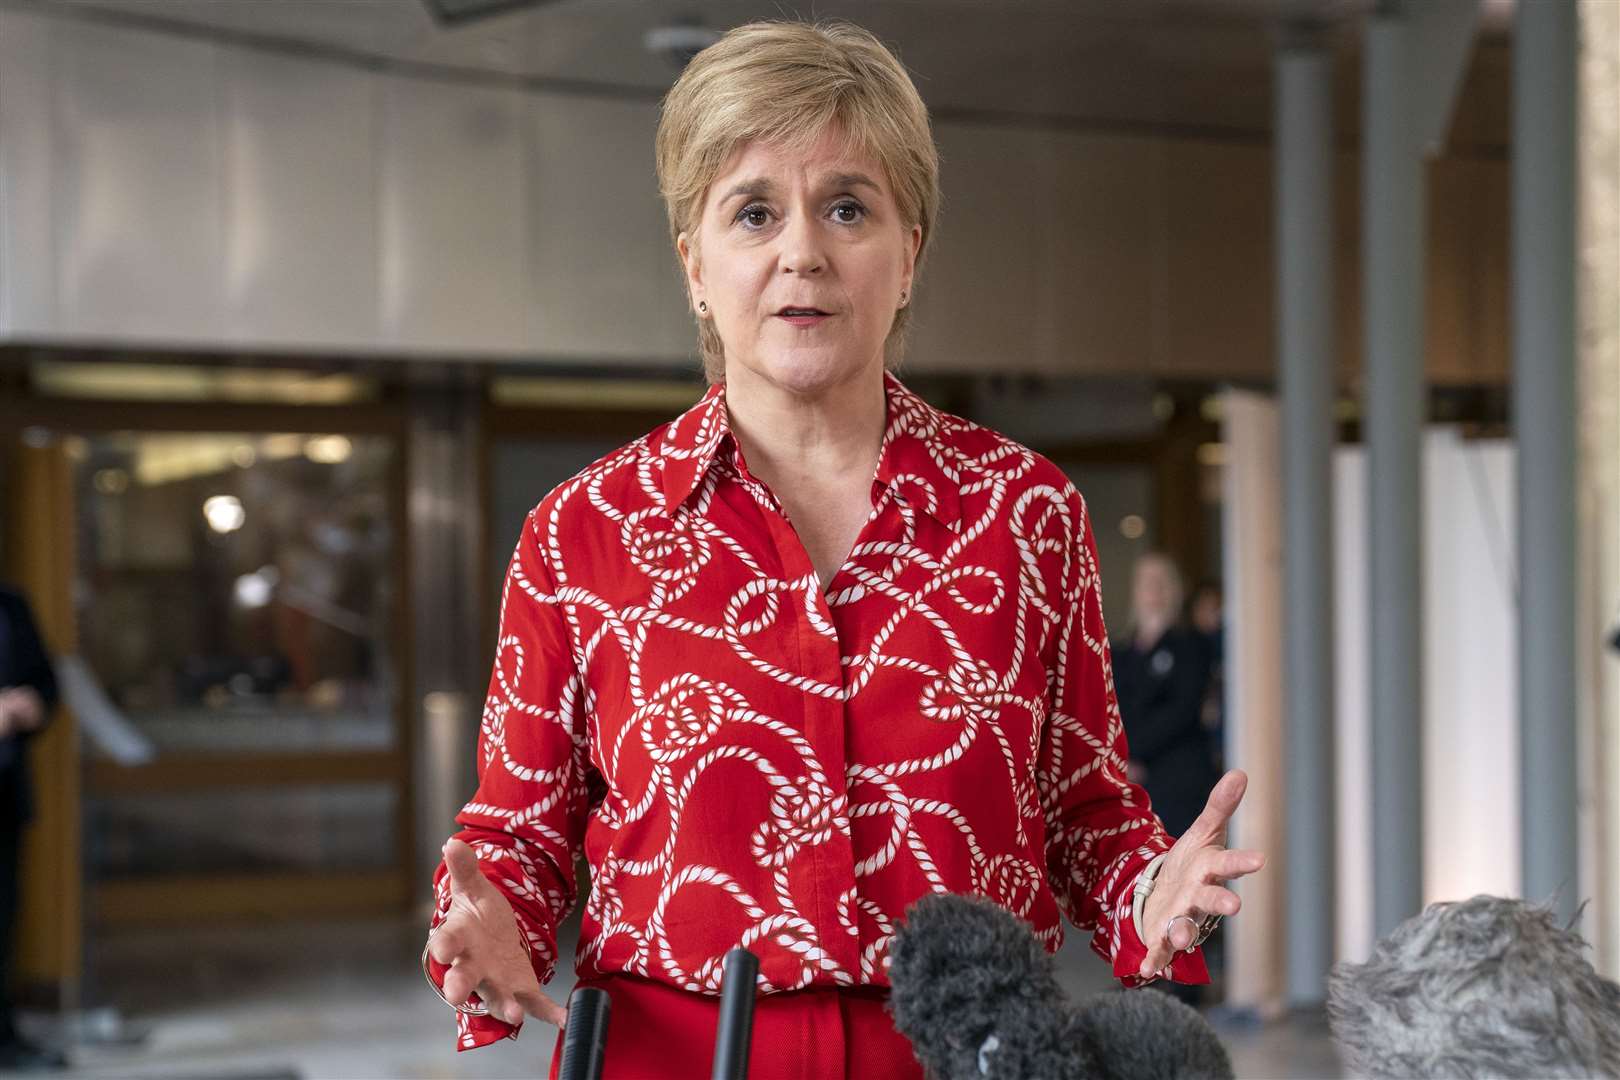 Nicola Sturgeon denied any wrongdoing after her arrest in the SNP finances probe (Jane Barlow/PA)